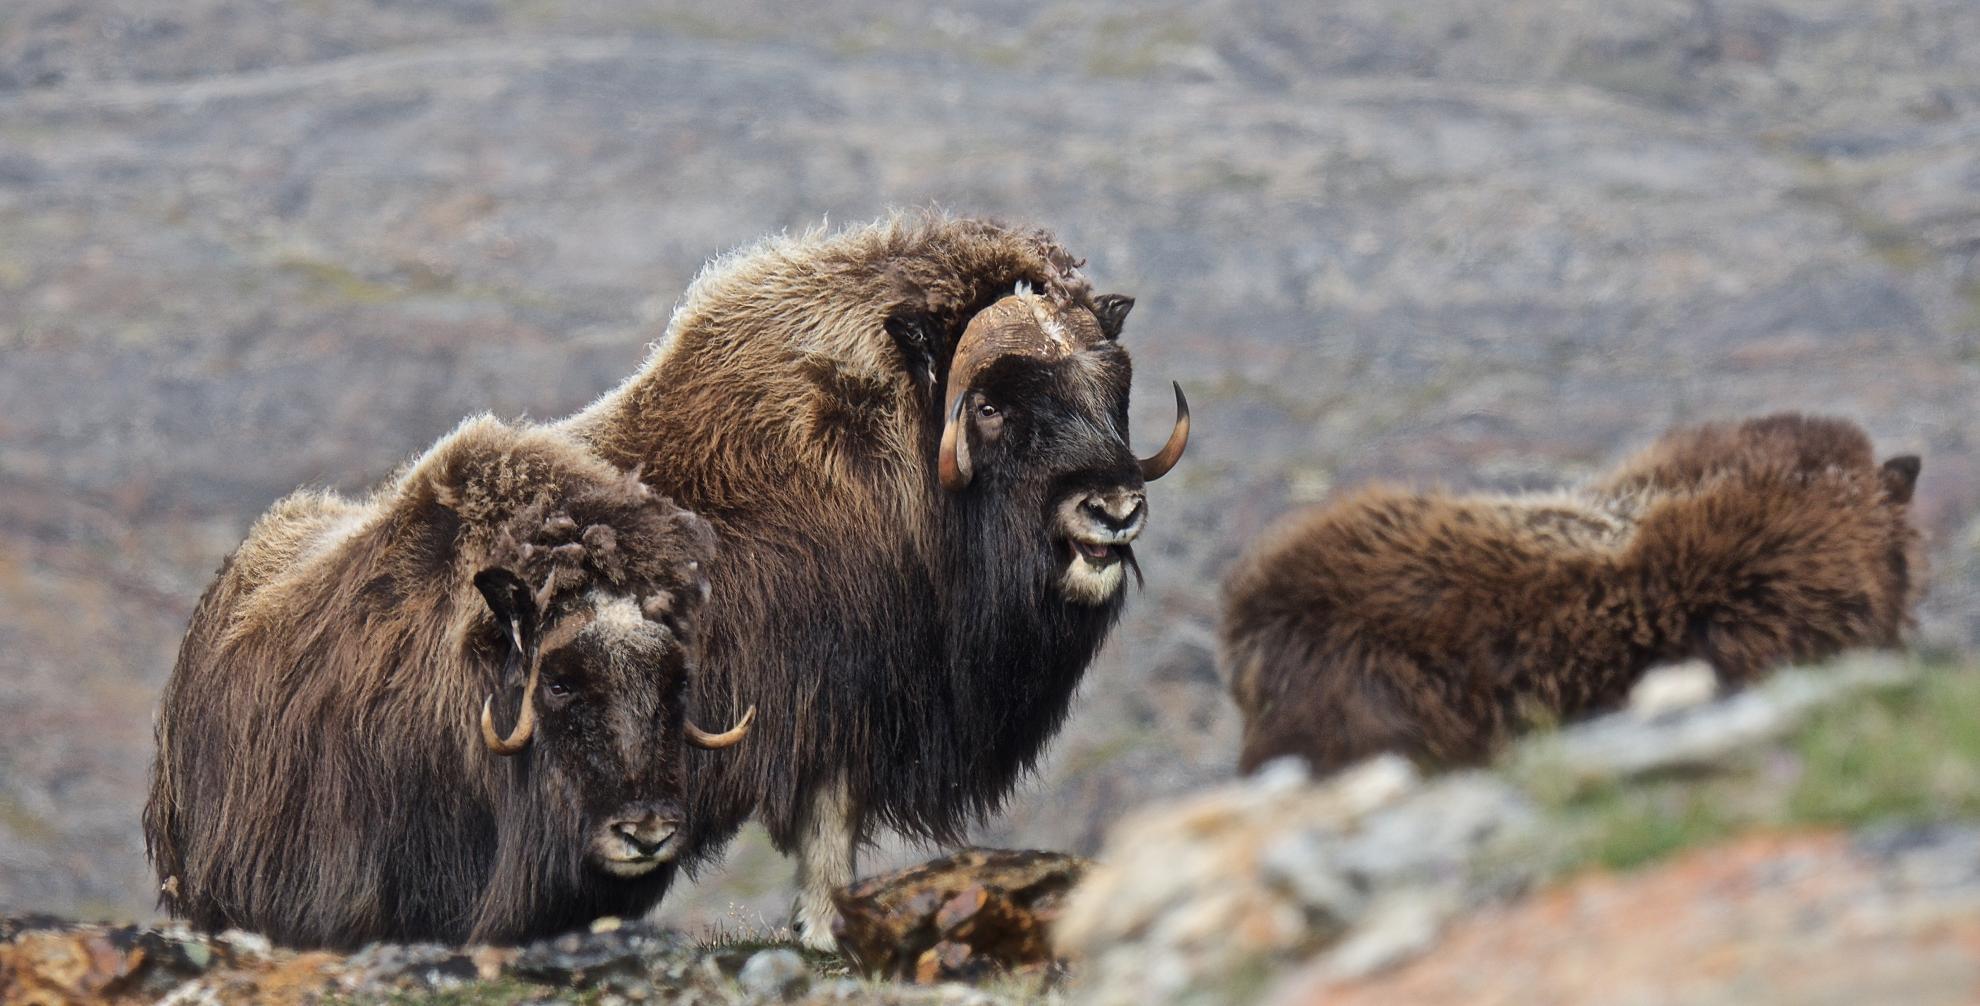 Muskoxen - Bull, Cow, Young © Dave Foreman